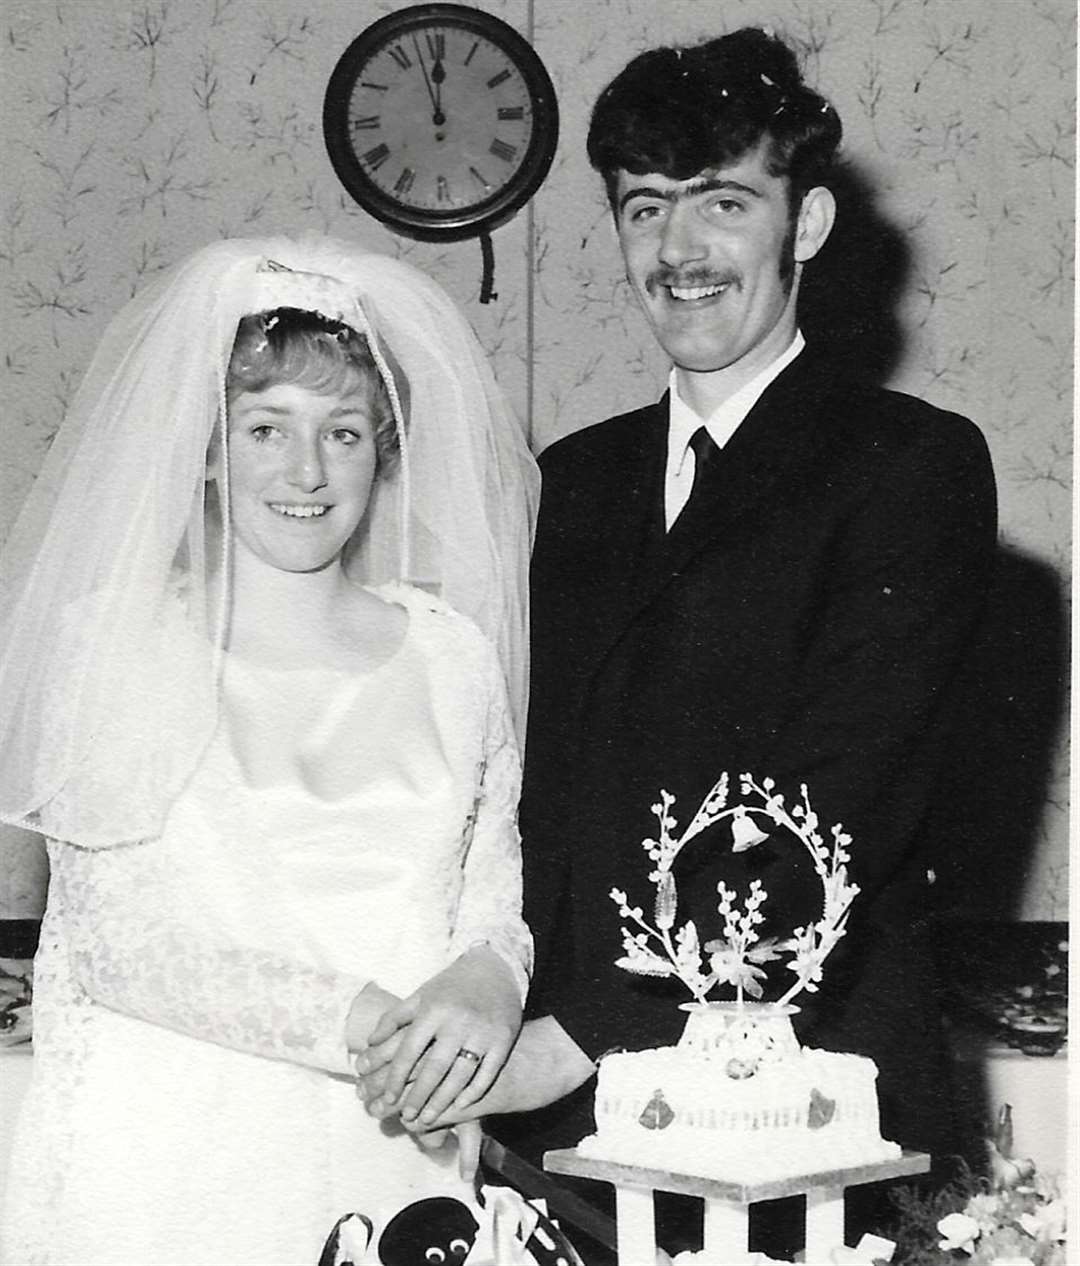 Sue and George Pearce on their wedding day on April 11, 1970